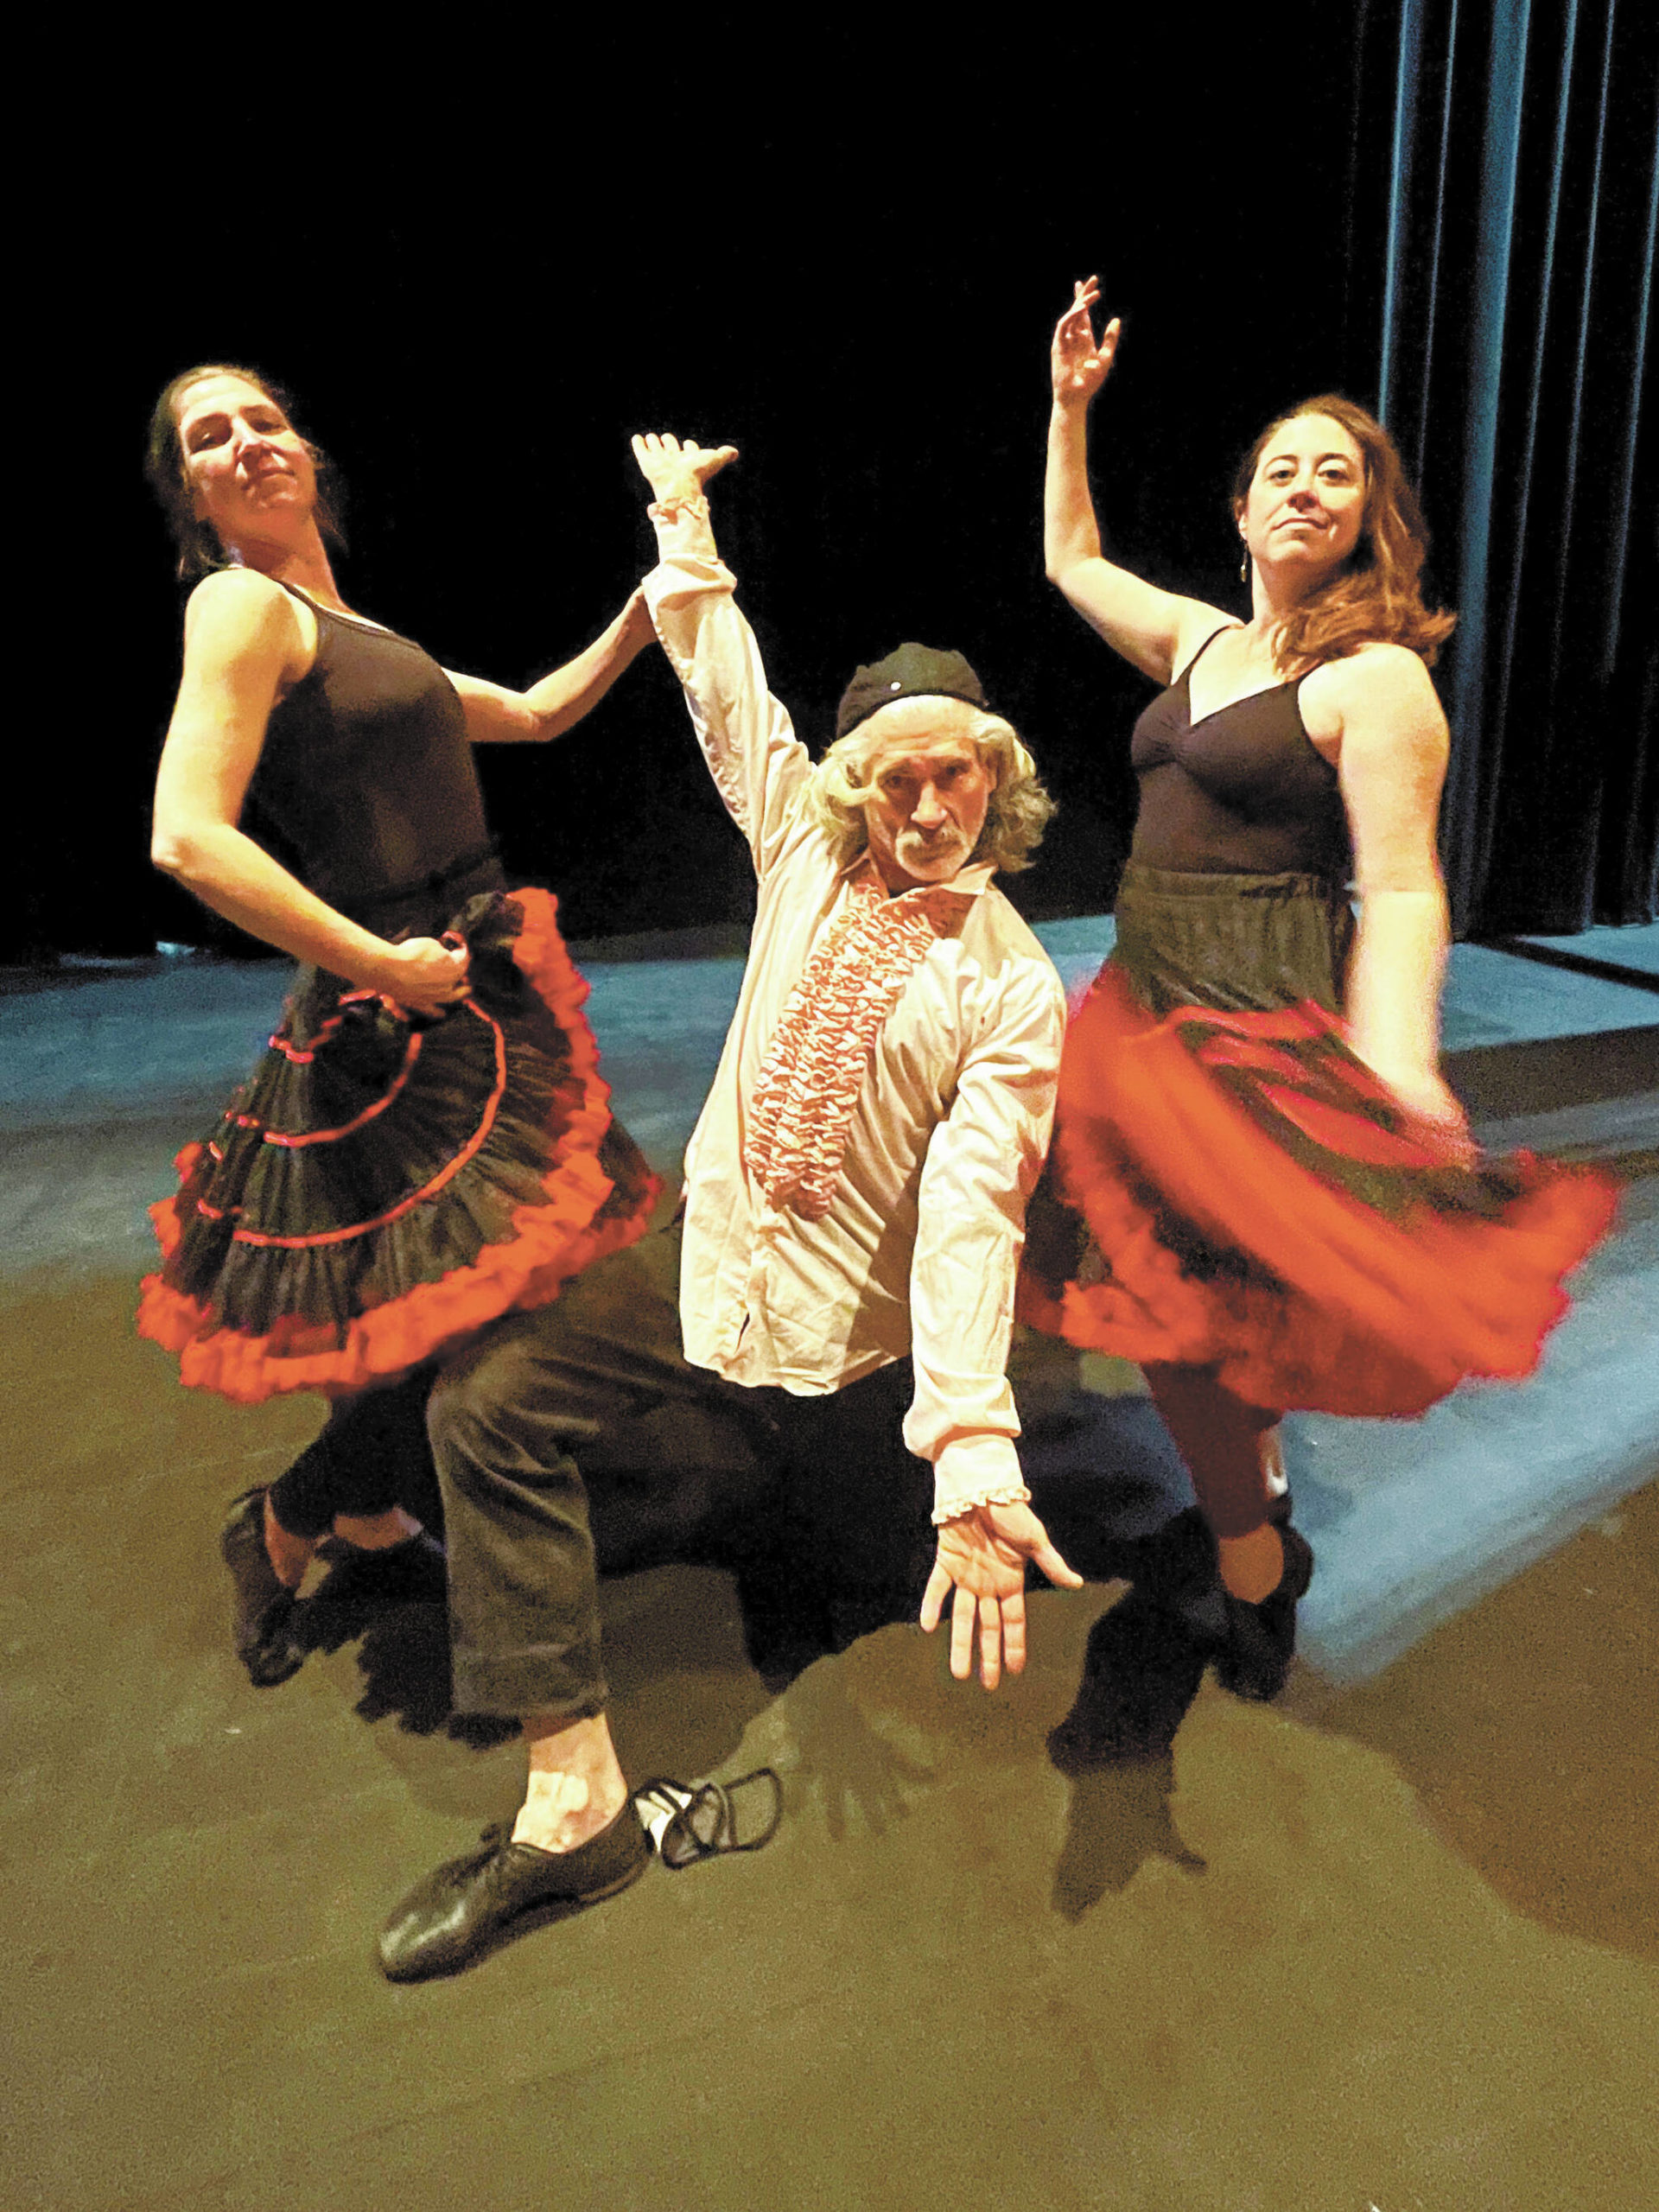 Photo provided
Emilie Springer, left, Brian Duffy, center, and Maura Jones, right rehearse for “Nice Moves,” one of the Alaska World Arts Festival events for the festival starting Friday.